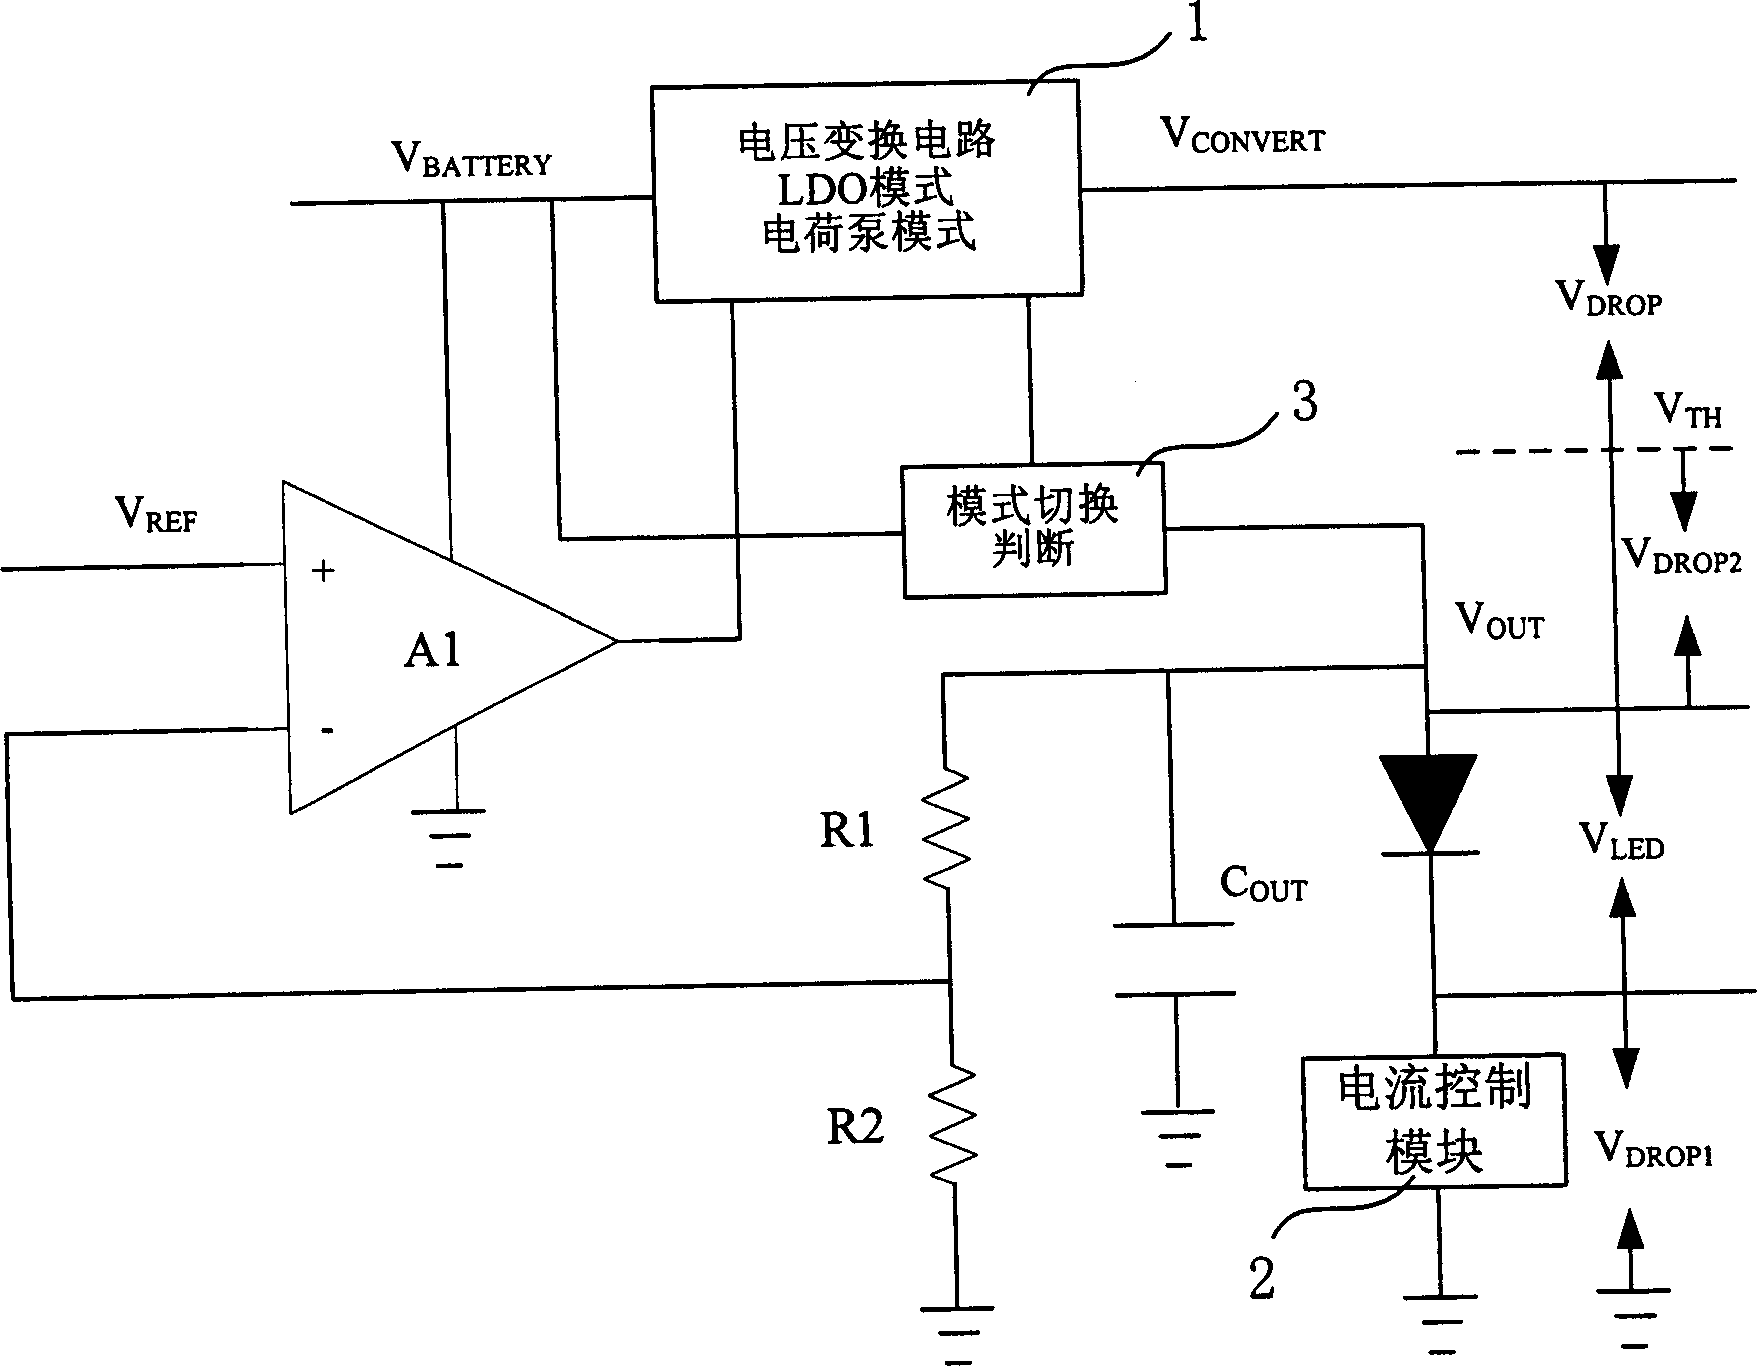 Parallel connection LED drive circuit with adaptive mode switching